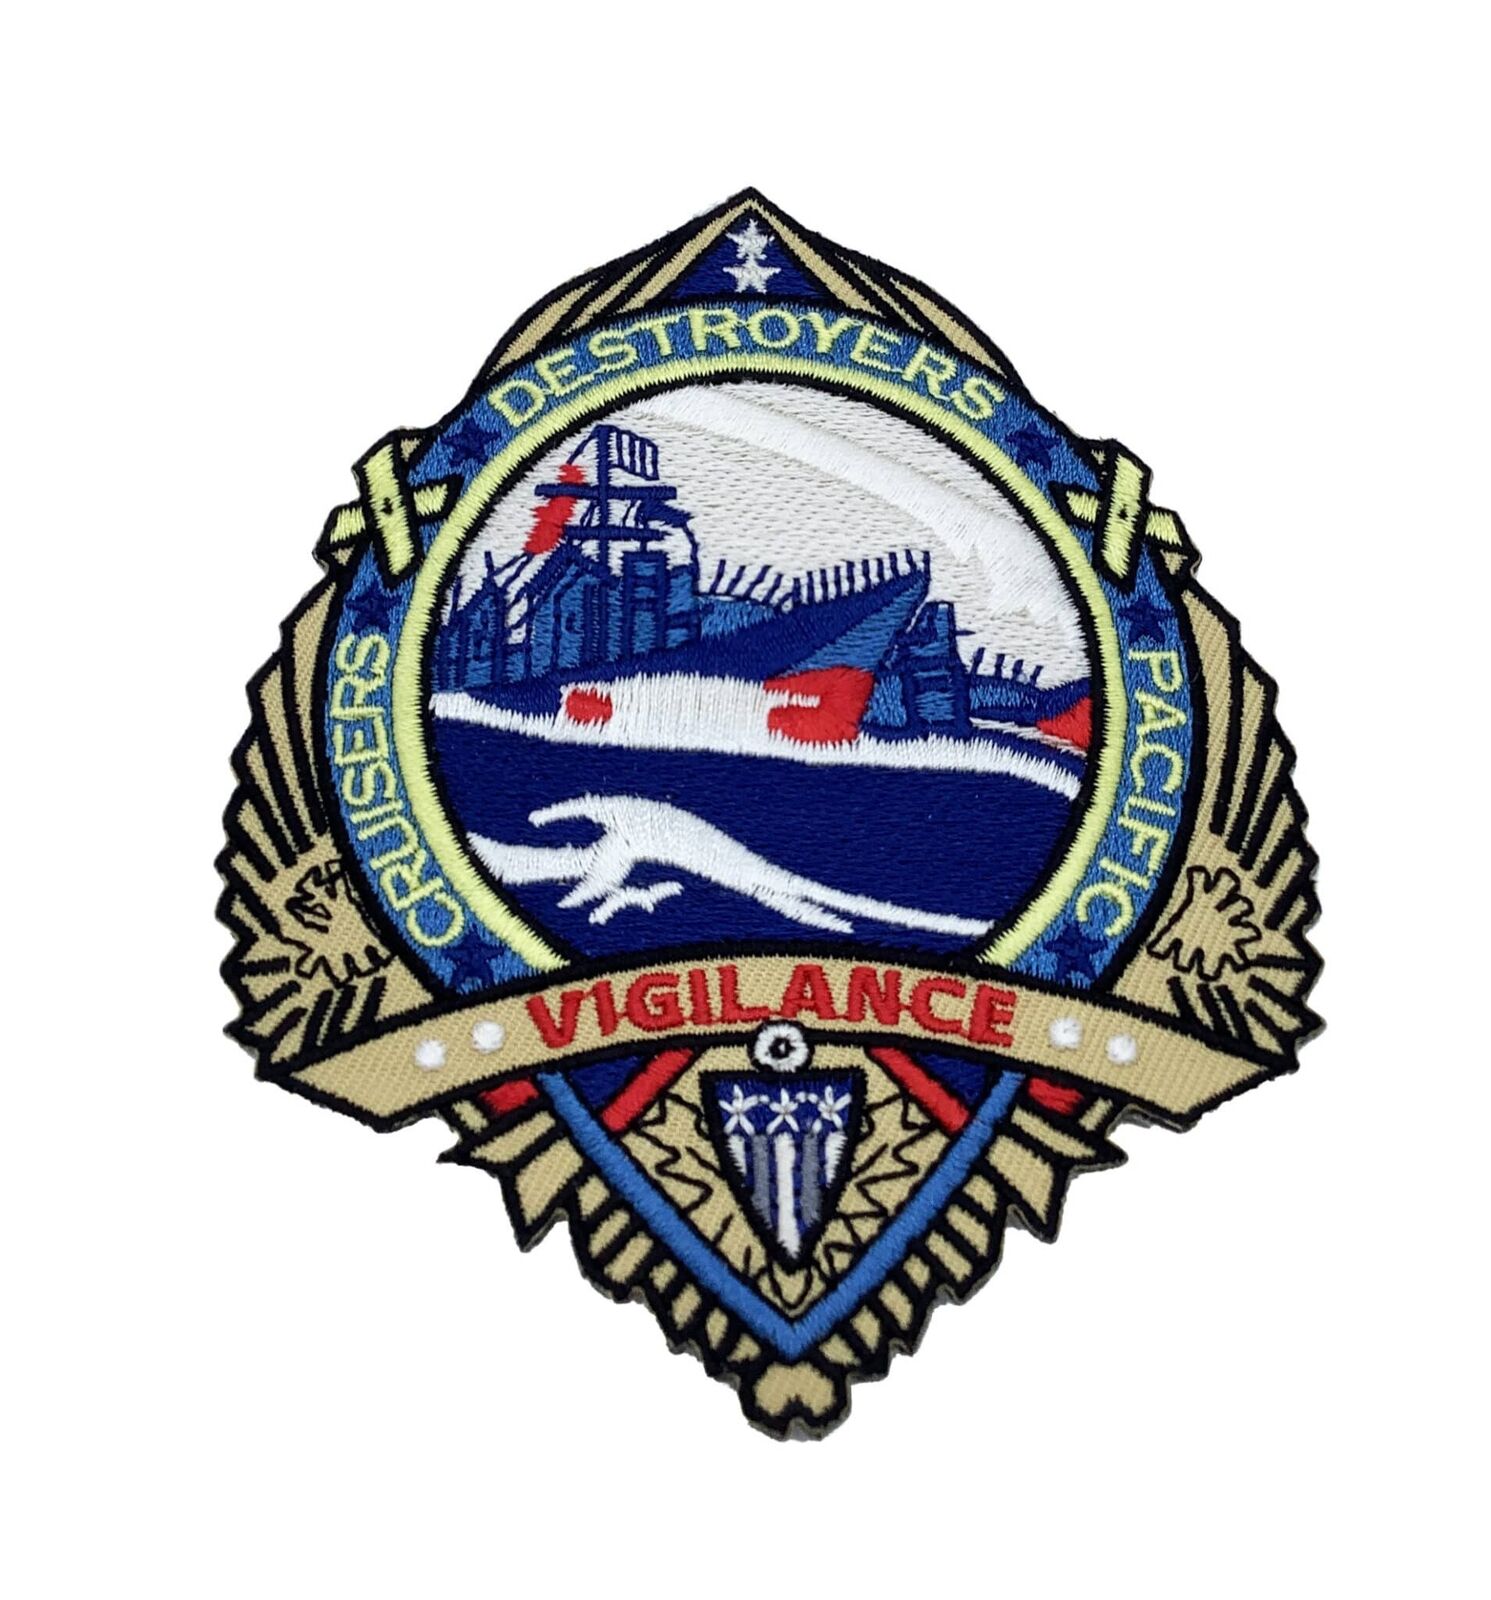 Cruisers, Destroyers Pacific Vigilance Patch – Plastic Backing, 4.5x3.5